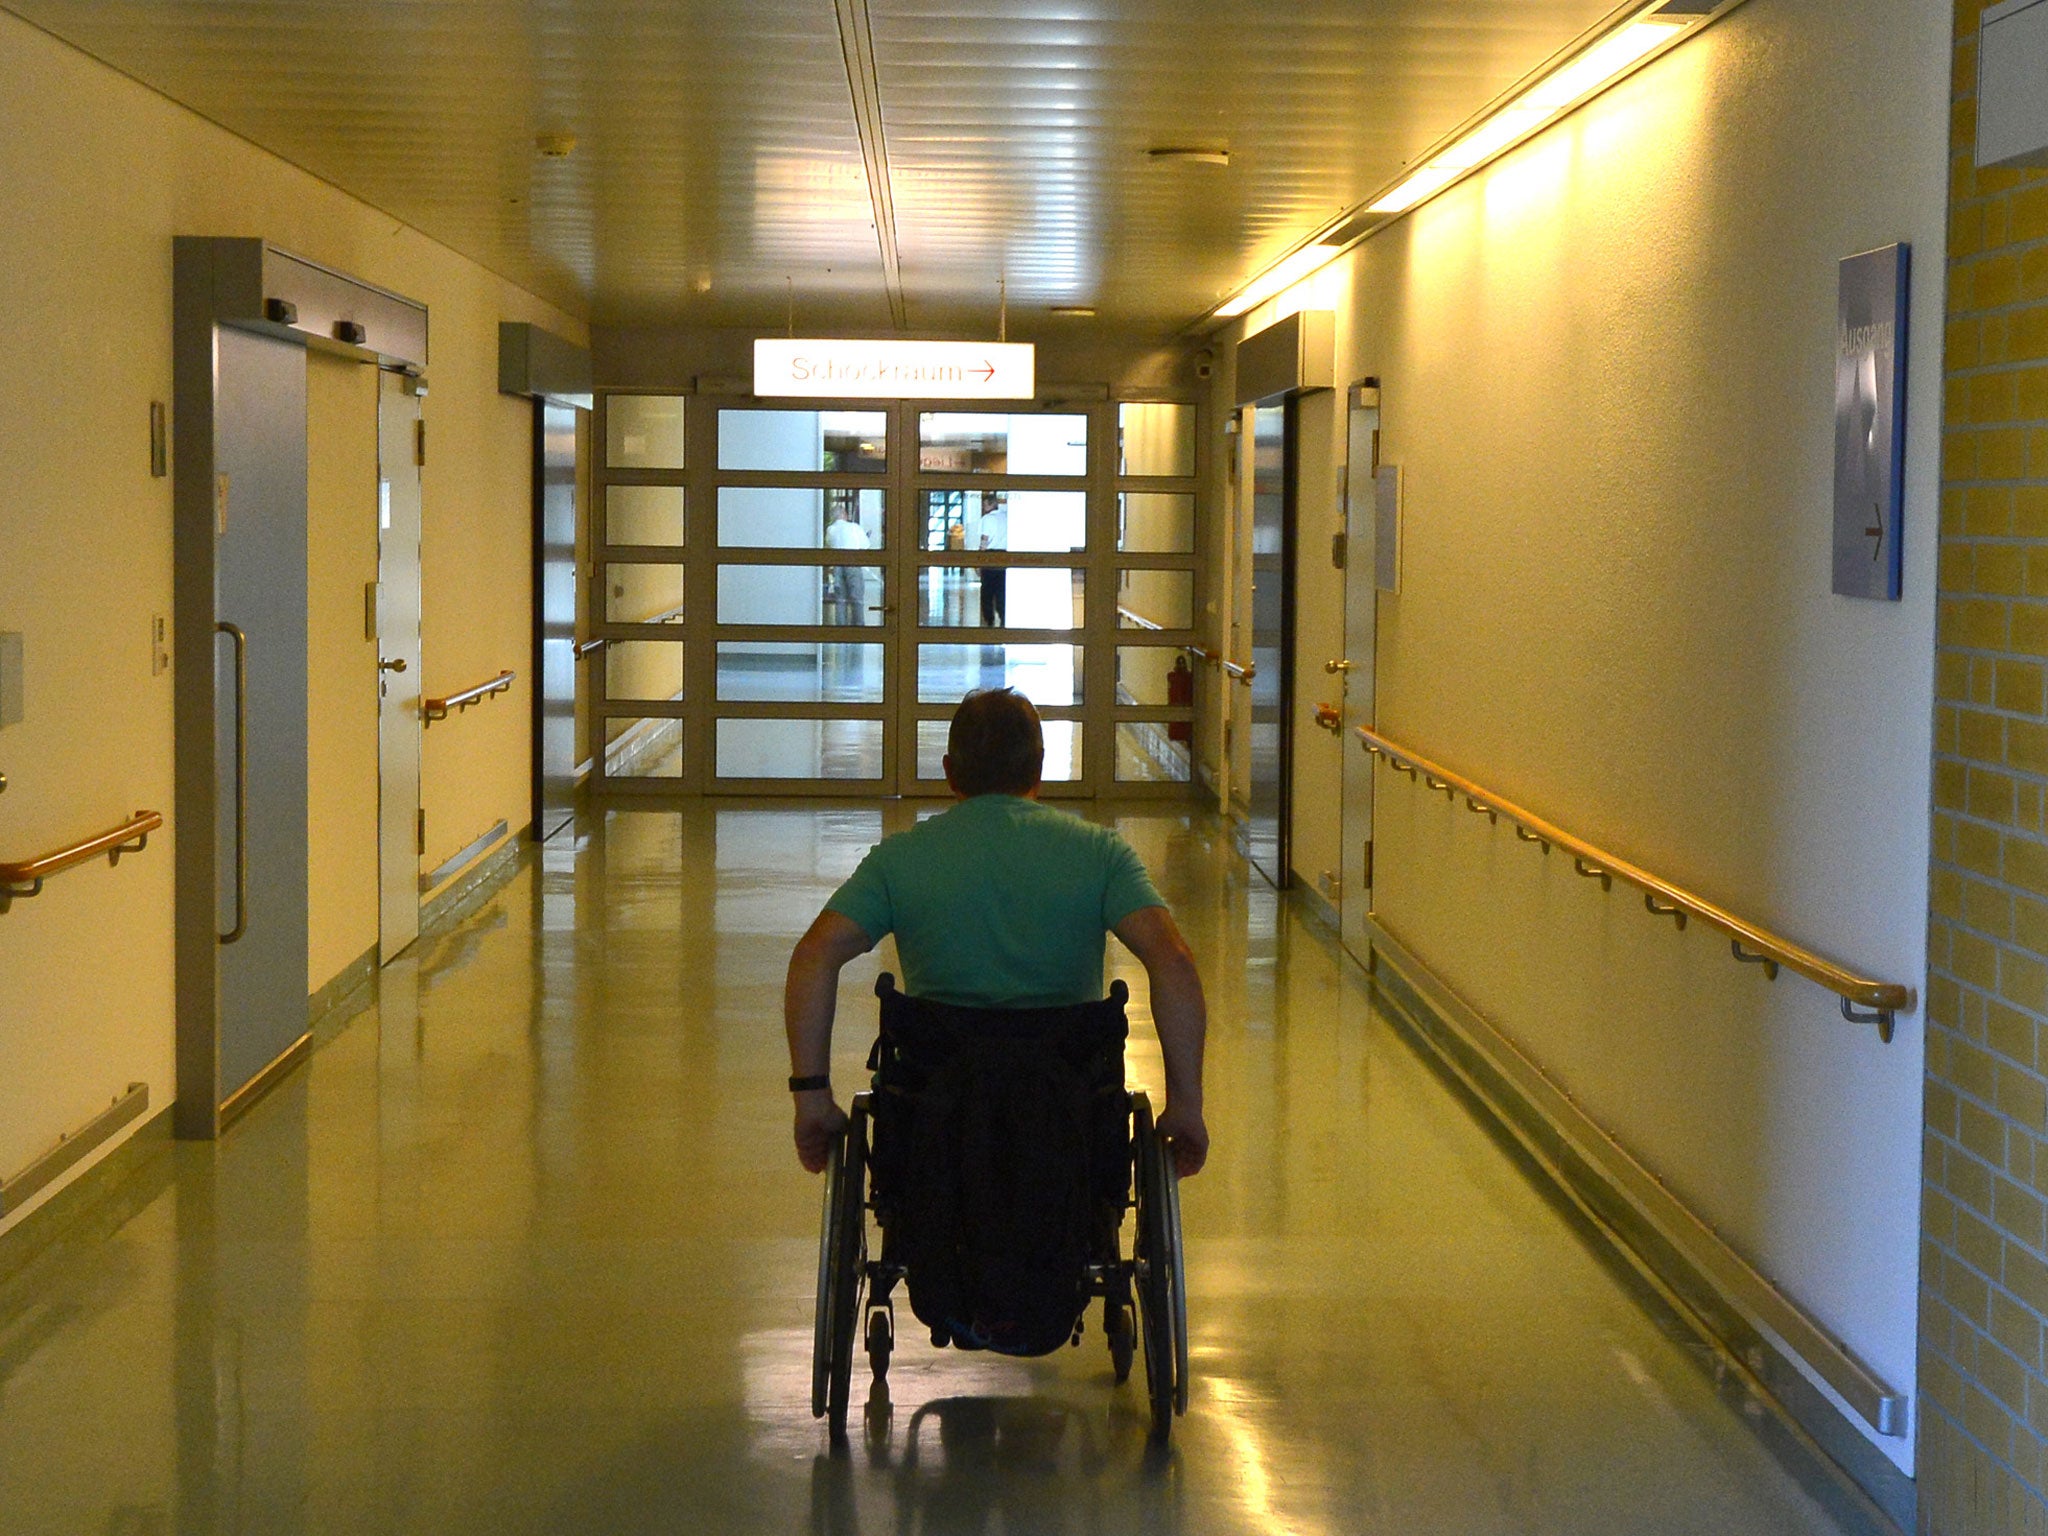 Changes to the welfare system for disabled people will be delayed, it has been announced